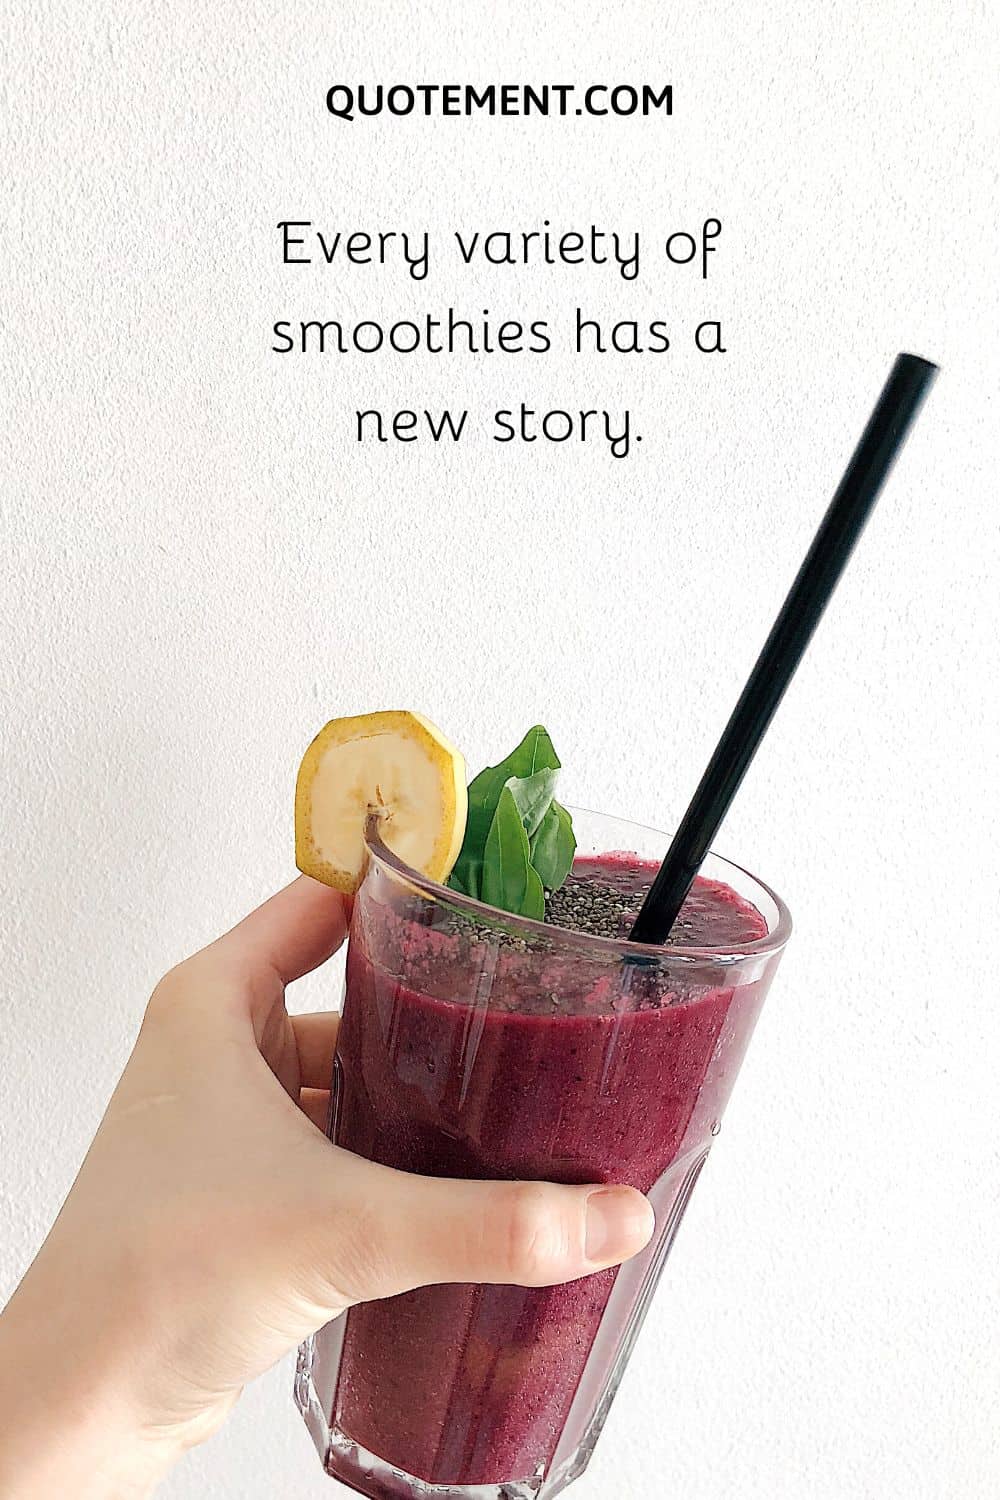 Every variety of smoothies has a new story.